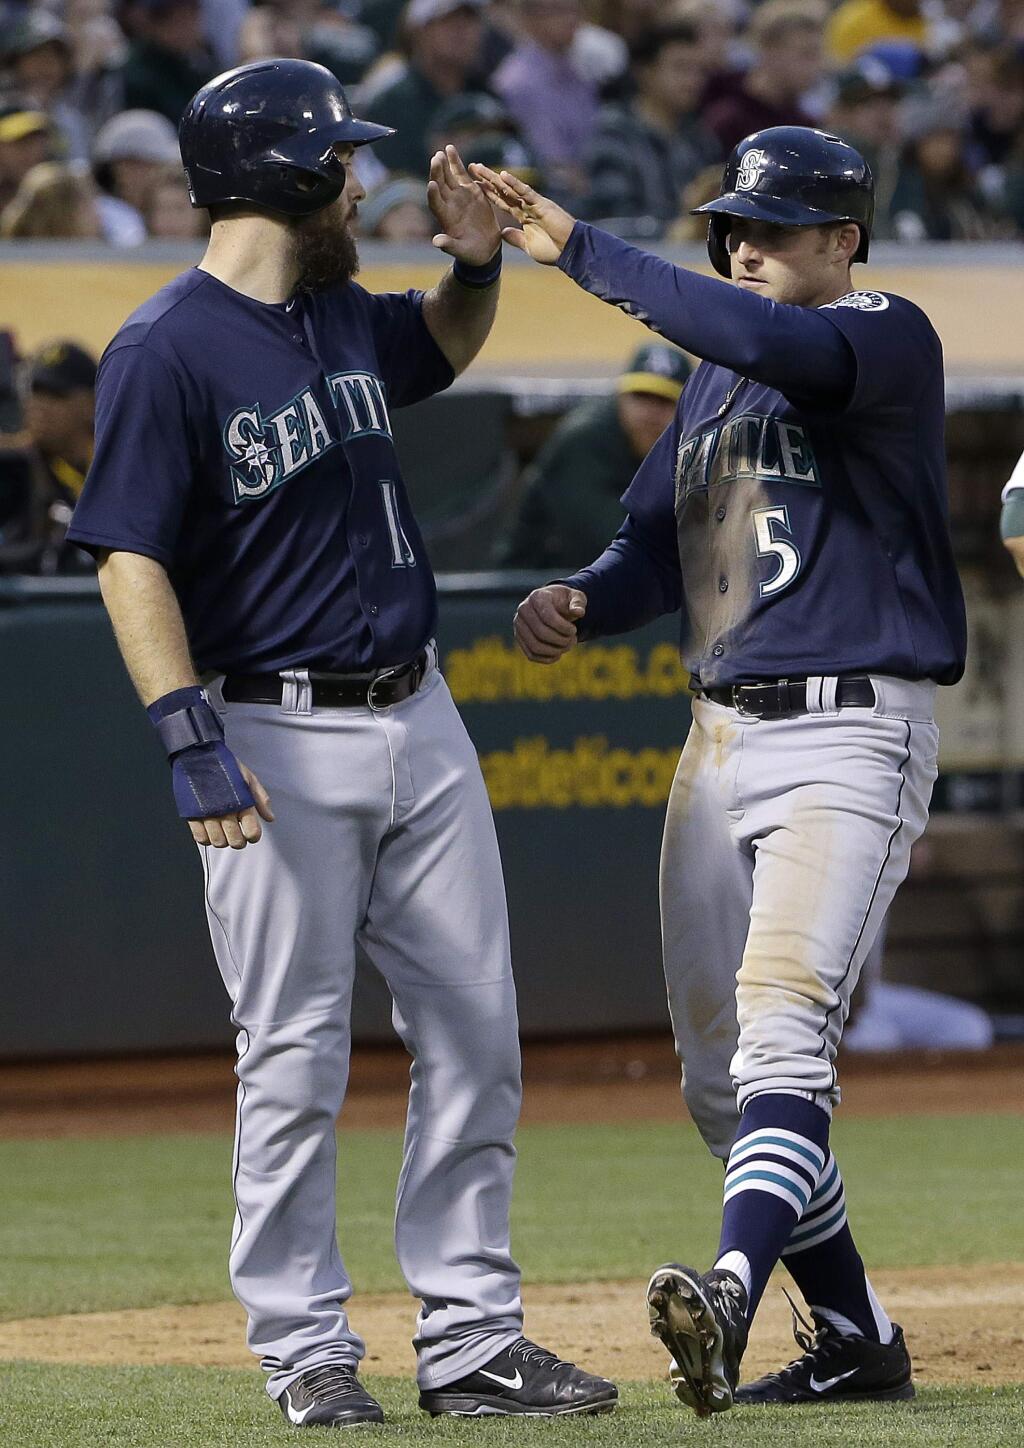 Seattle Mariners' Brad Miller, right, celebrates after hitting a two-run home run that scored Dustin Ackley, left, during the eighth inning of a baseball game against the Oakland Athletics in Oakland, Calif., Friday, July 3, 2015. (AP Photo/Jeff Chiu)